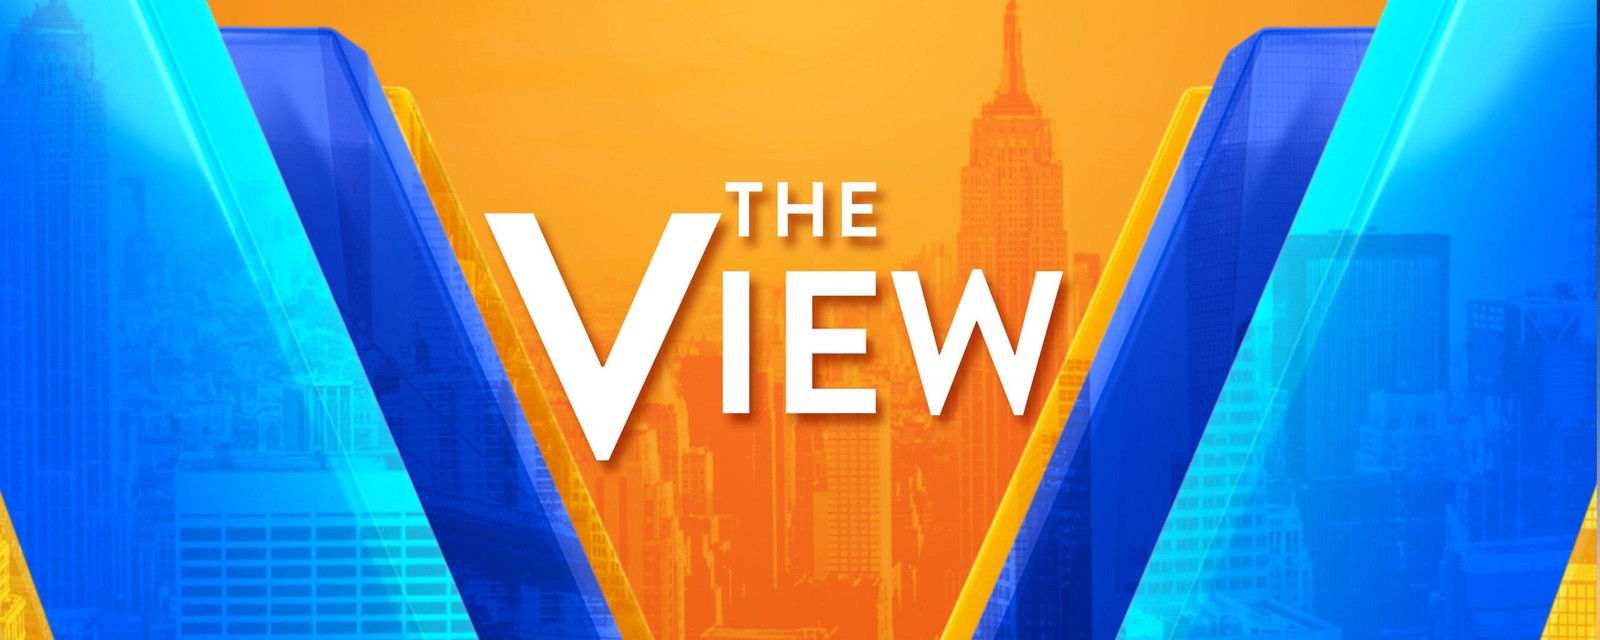 The View’s Holiday Sweepstakes | The View